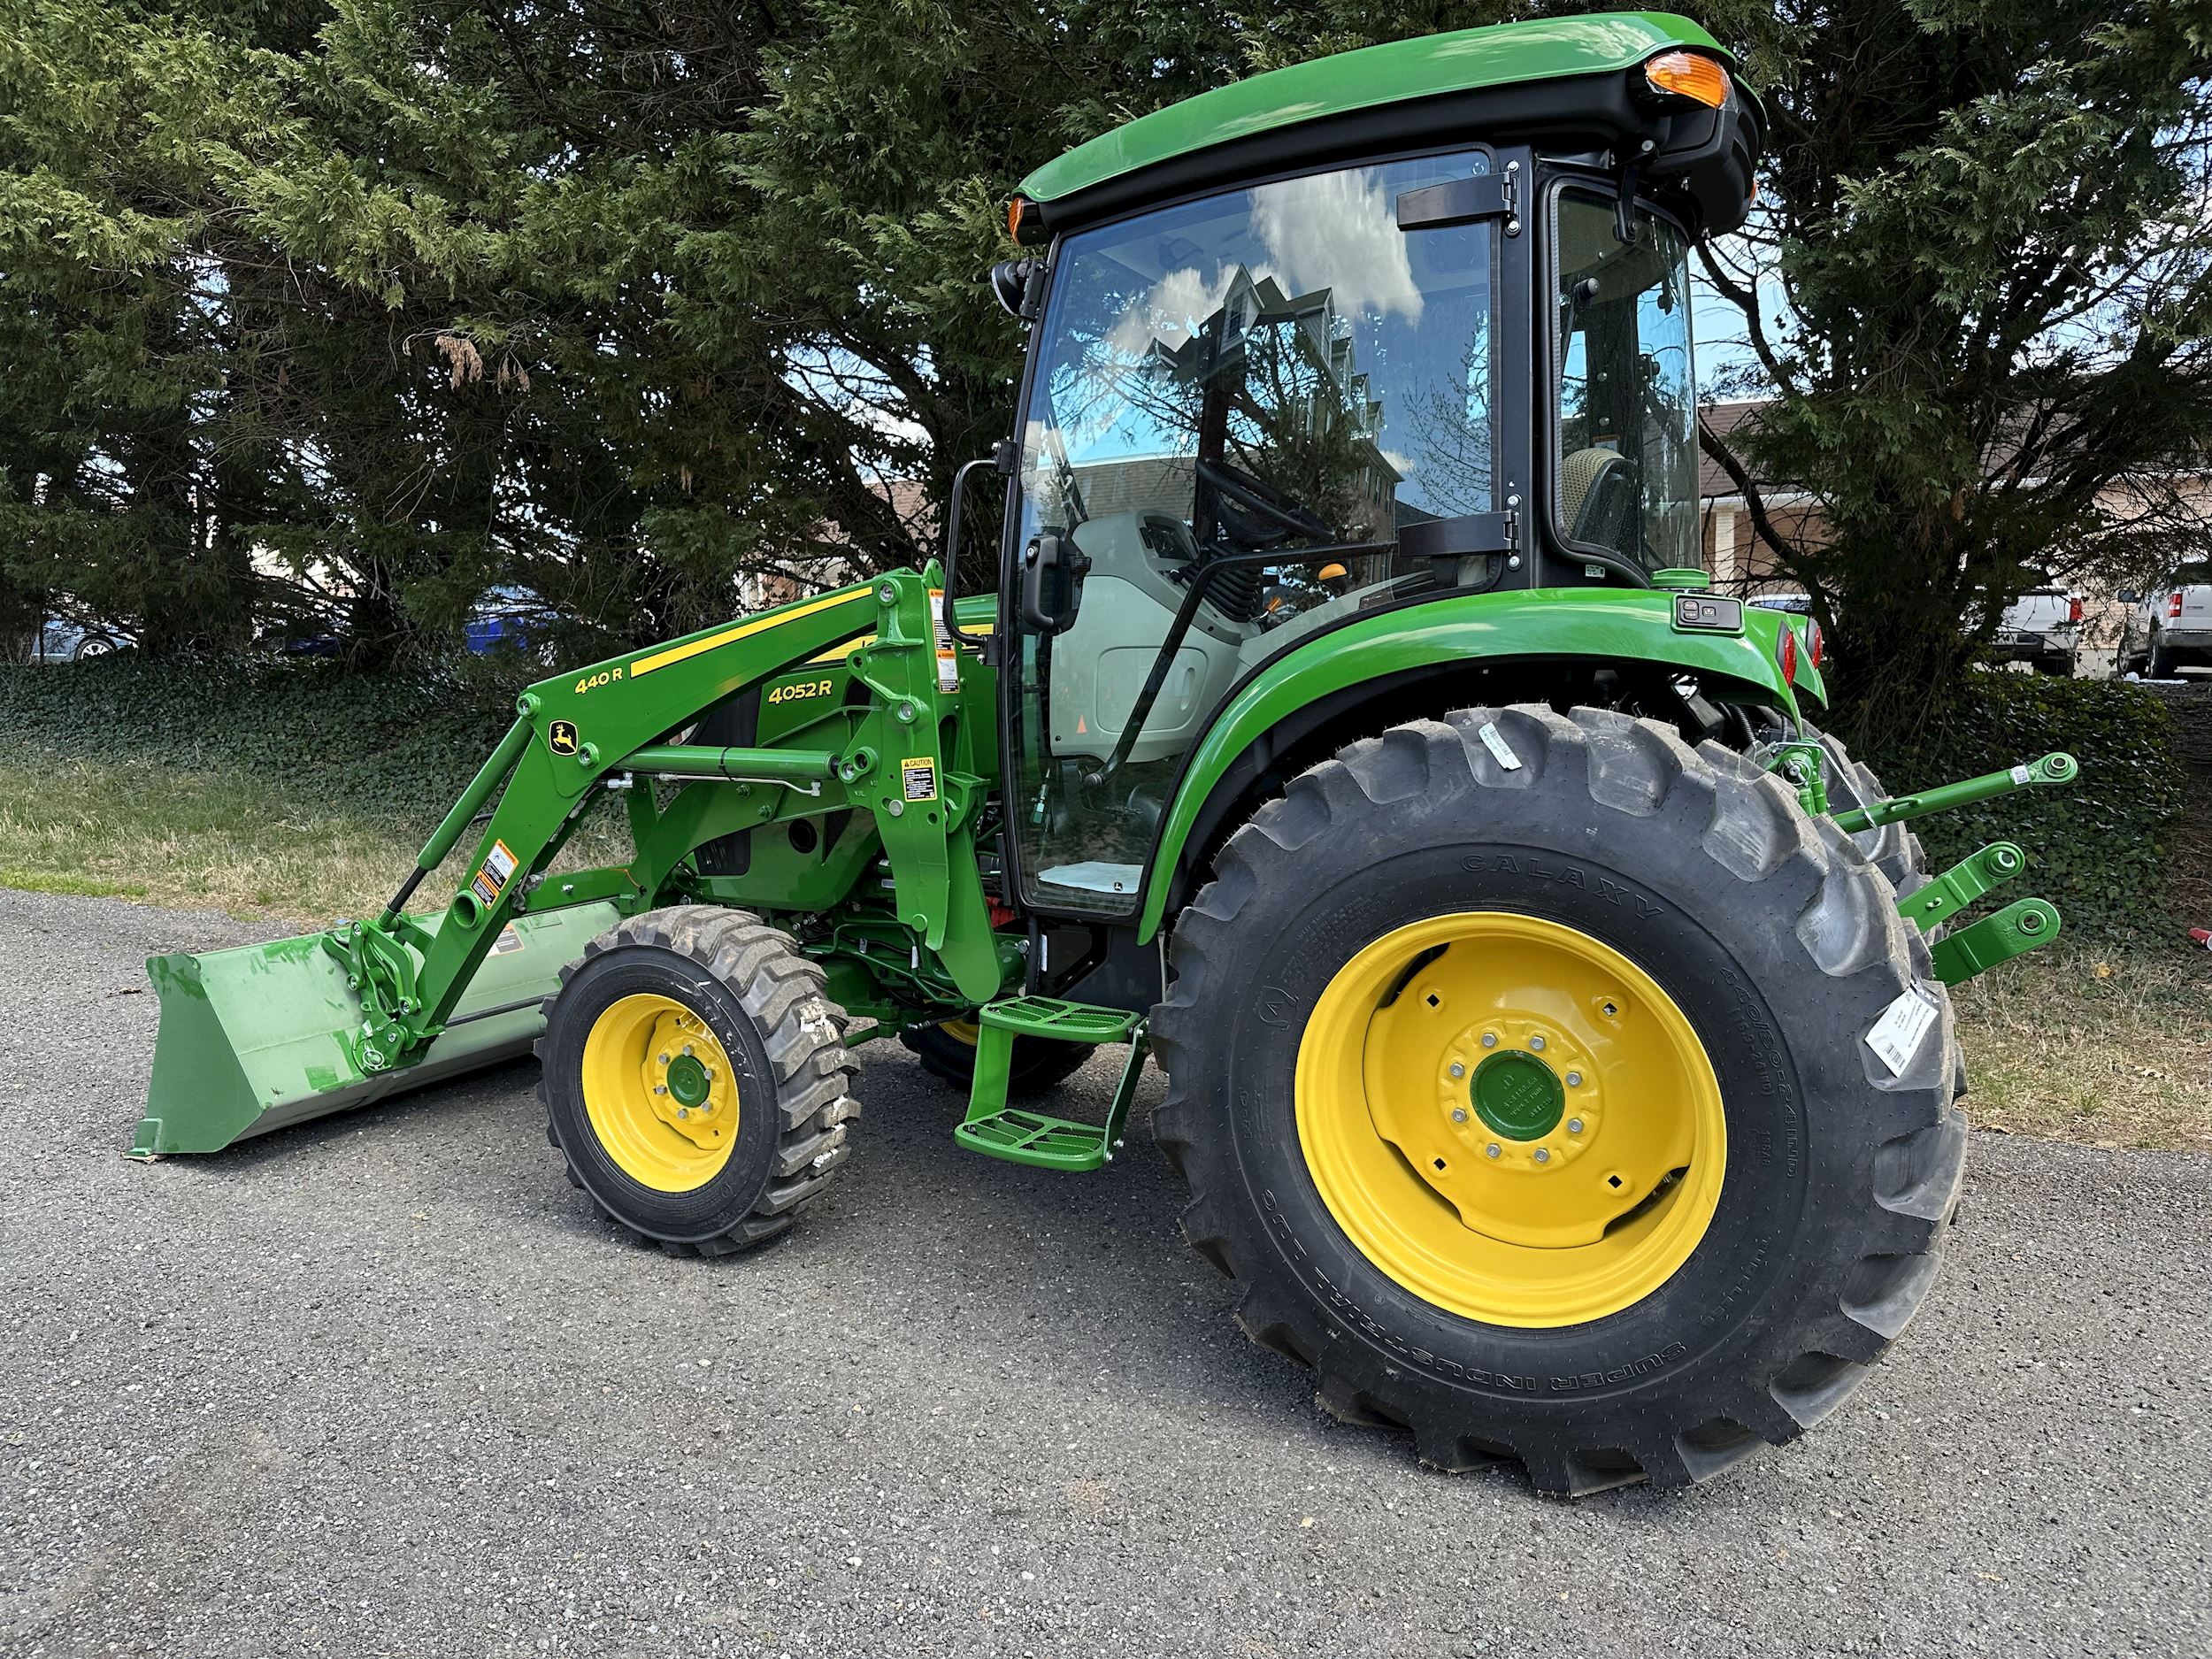 4052R Compact Utility Tractor